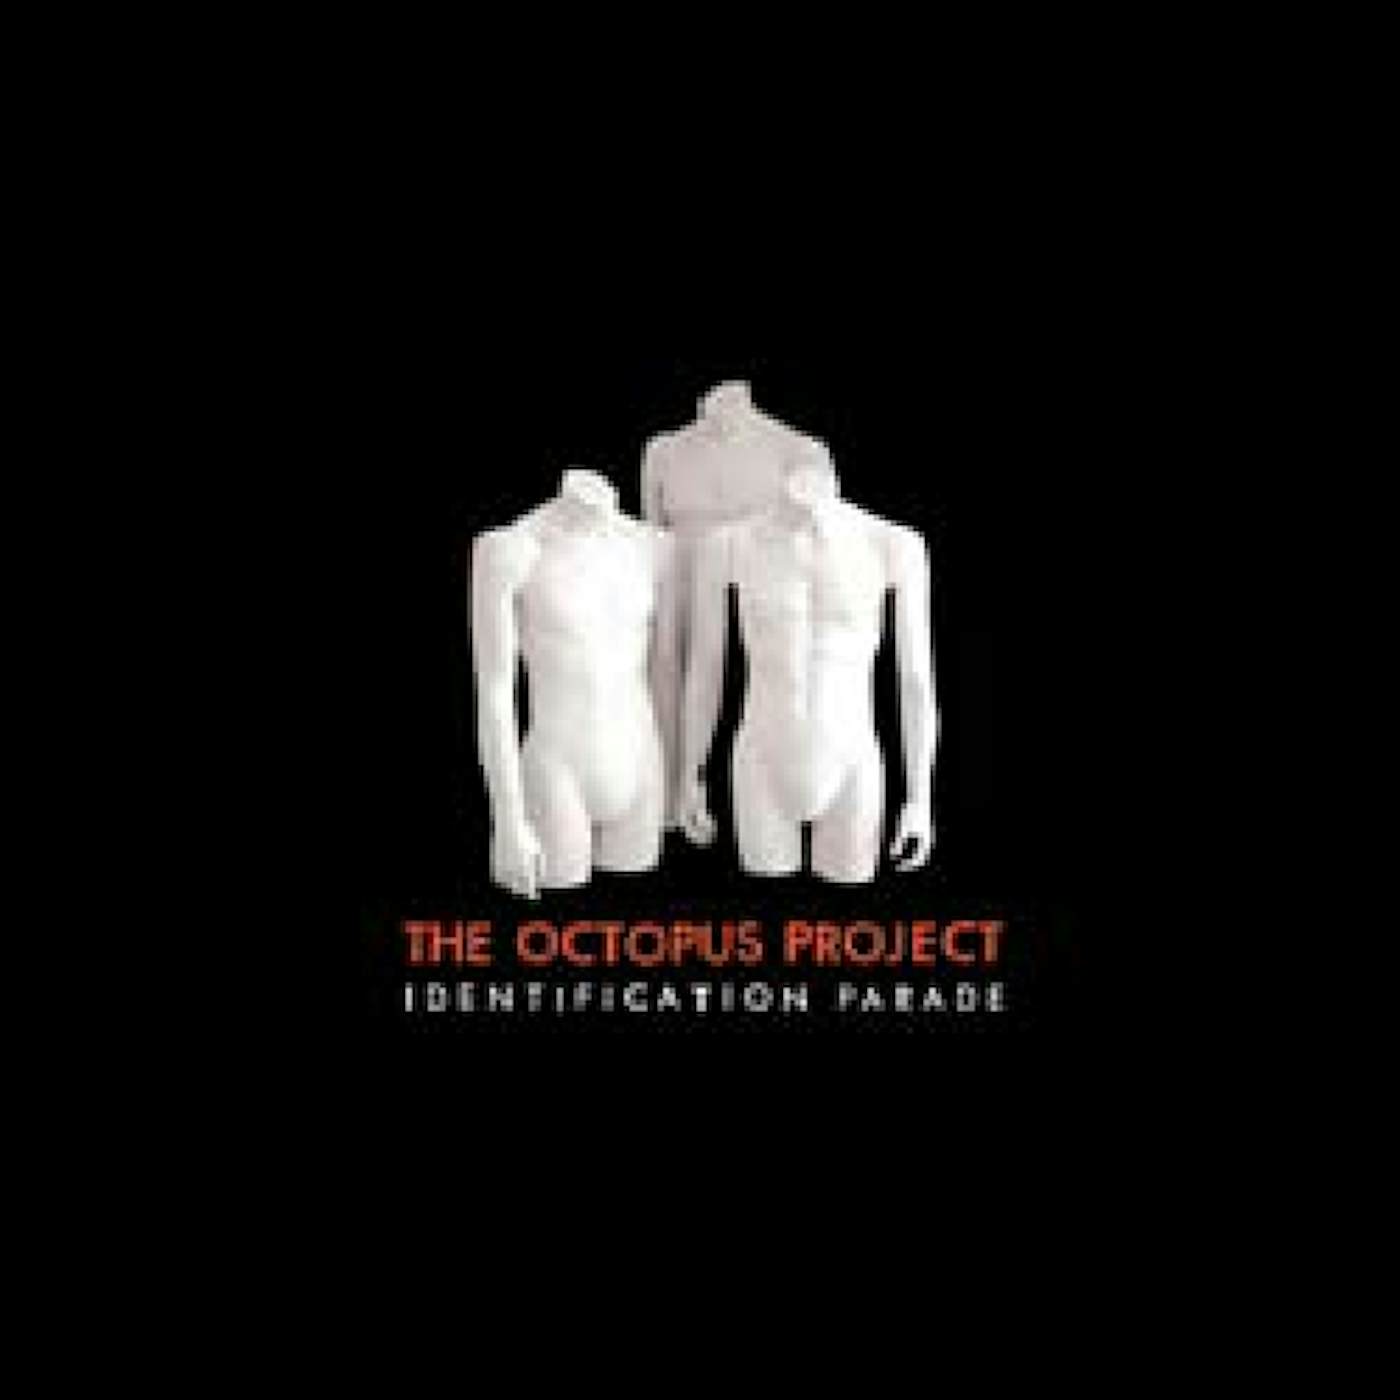 The Octopus Project Identification Parade Vinyl Record